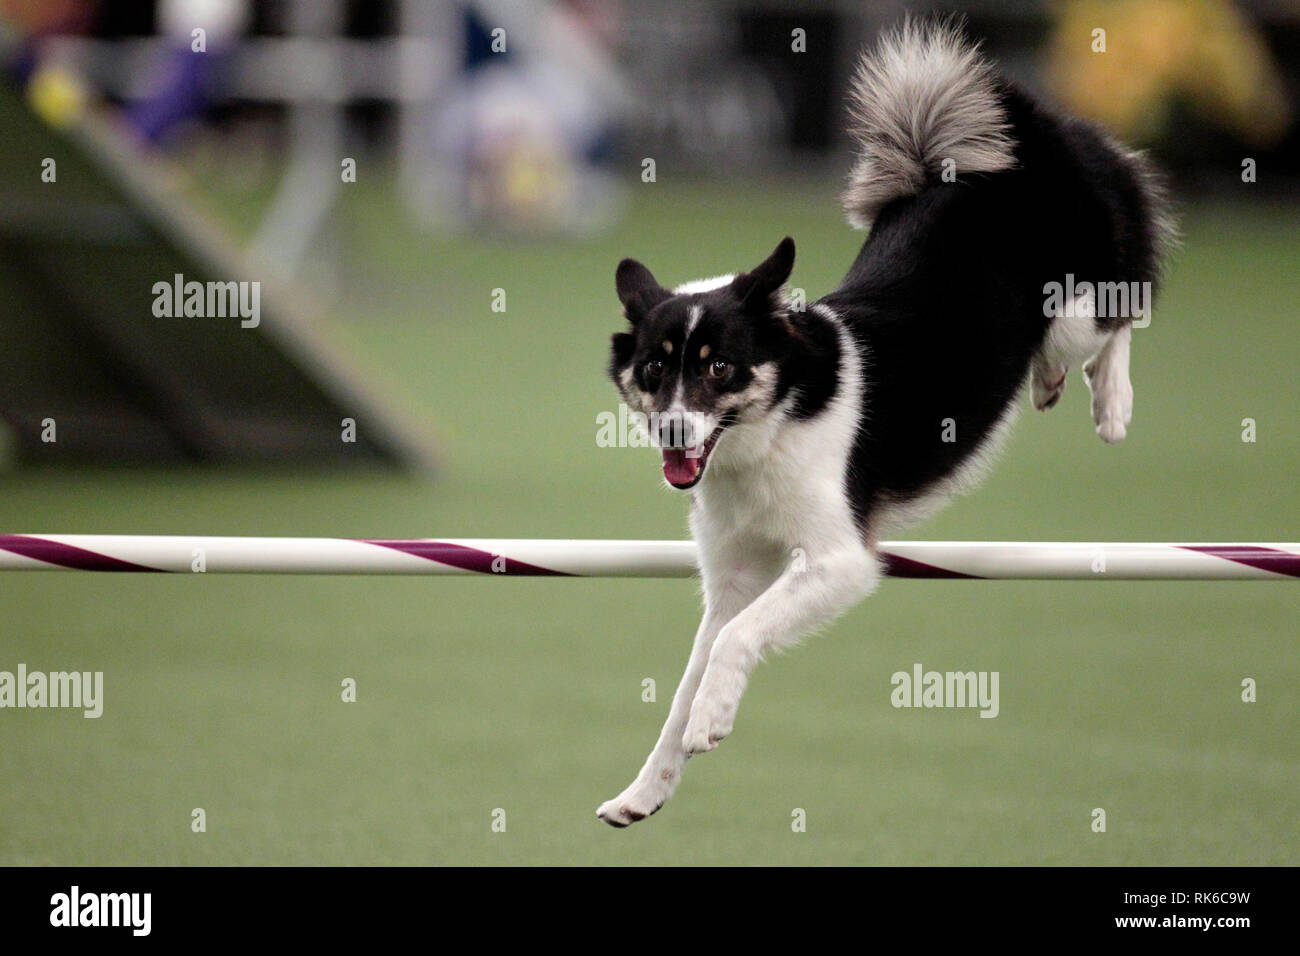 New York, USA. 09th Feb, 2019. Westminster Dog Show - Loa, an Icelandic Sheepdog, competing in the preliminaries of the Westminster Kennel Club's Master's Agility Championship. Credit: Adam Stoltman/Alamy Live News Stock Photo